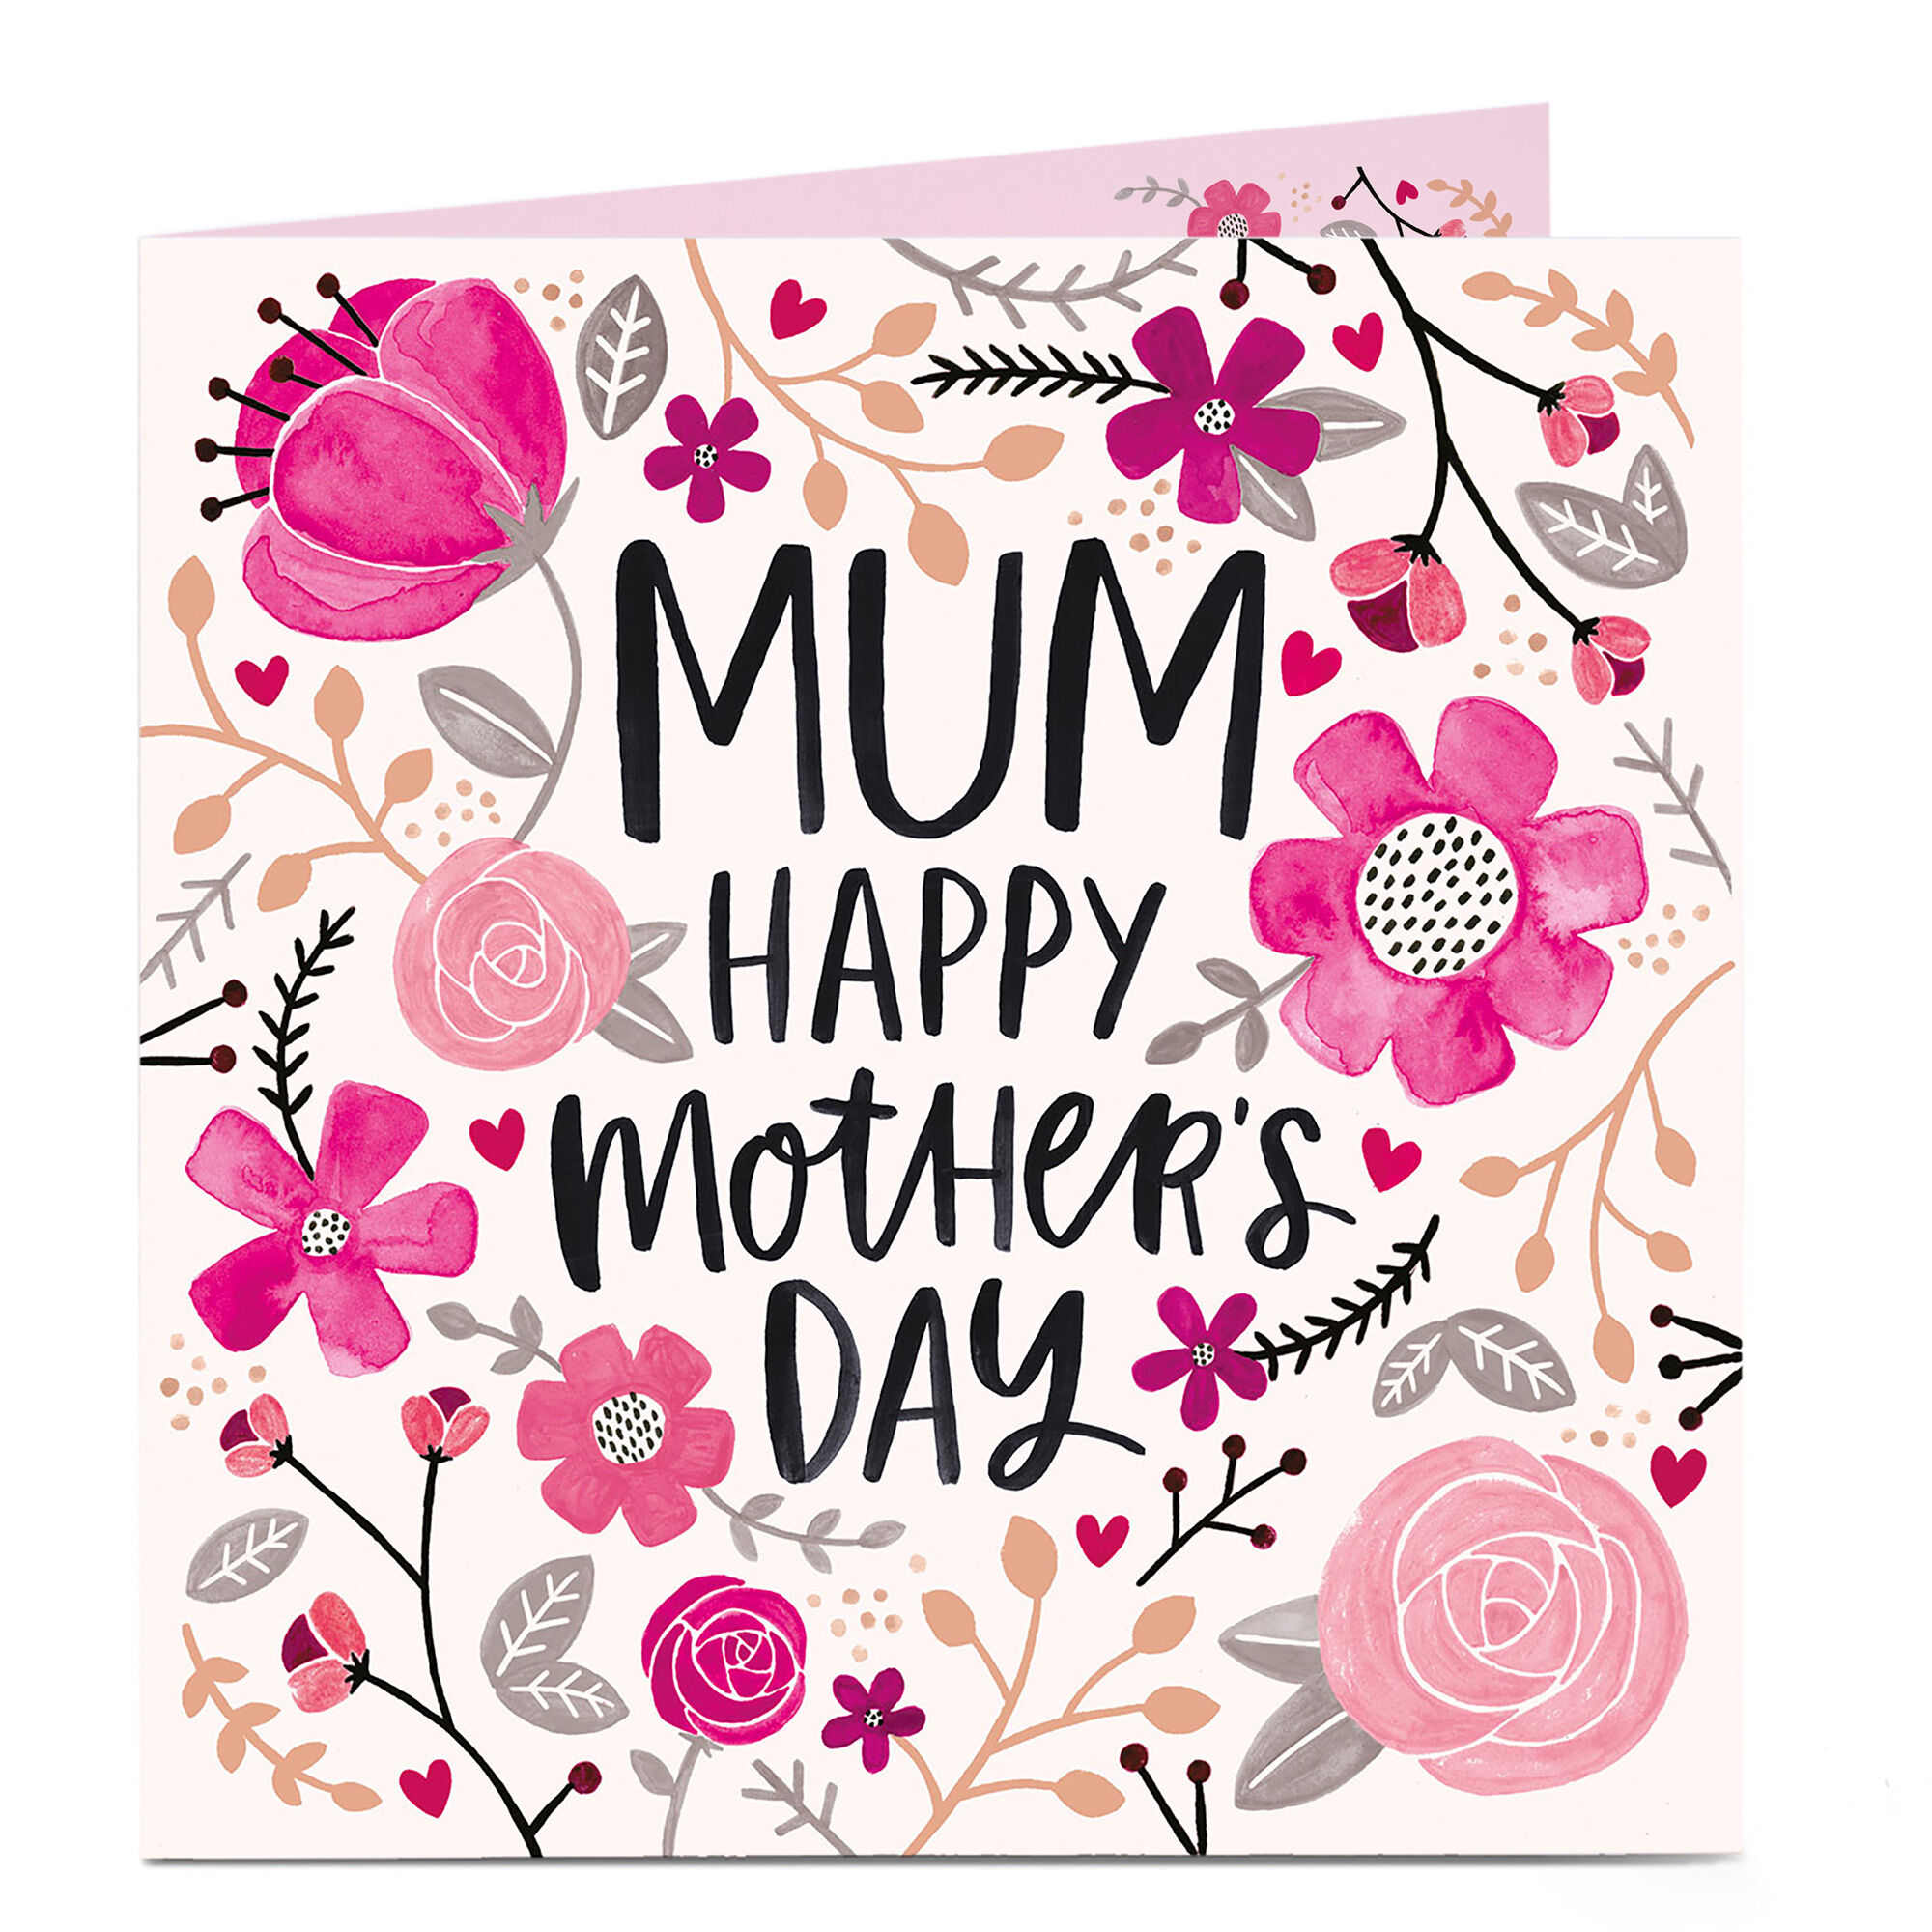 Thank You For Everything Mum Card Mothers Day Photo Card Photo Card from Daughter Mum Photo Card Cute Mum Card, Mothers Day Card UK